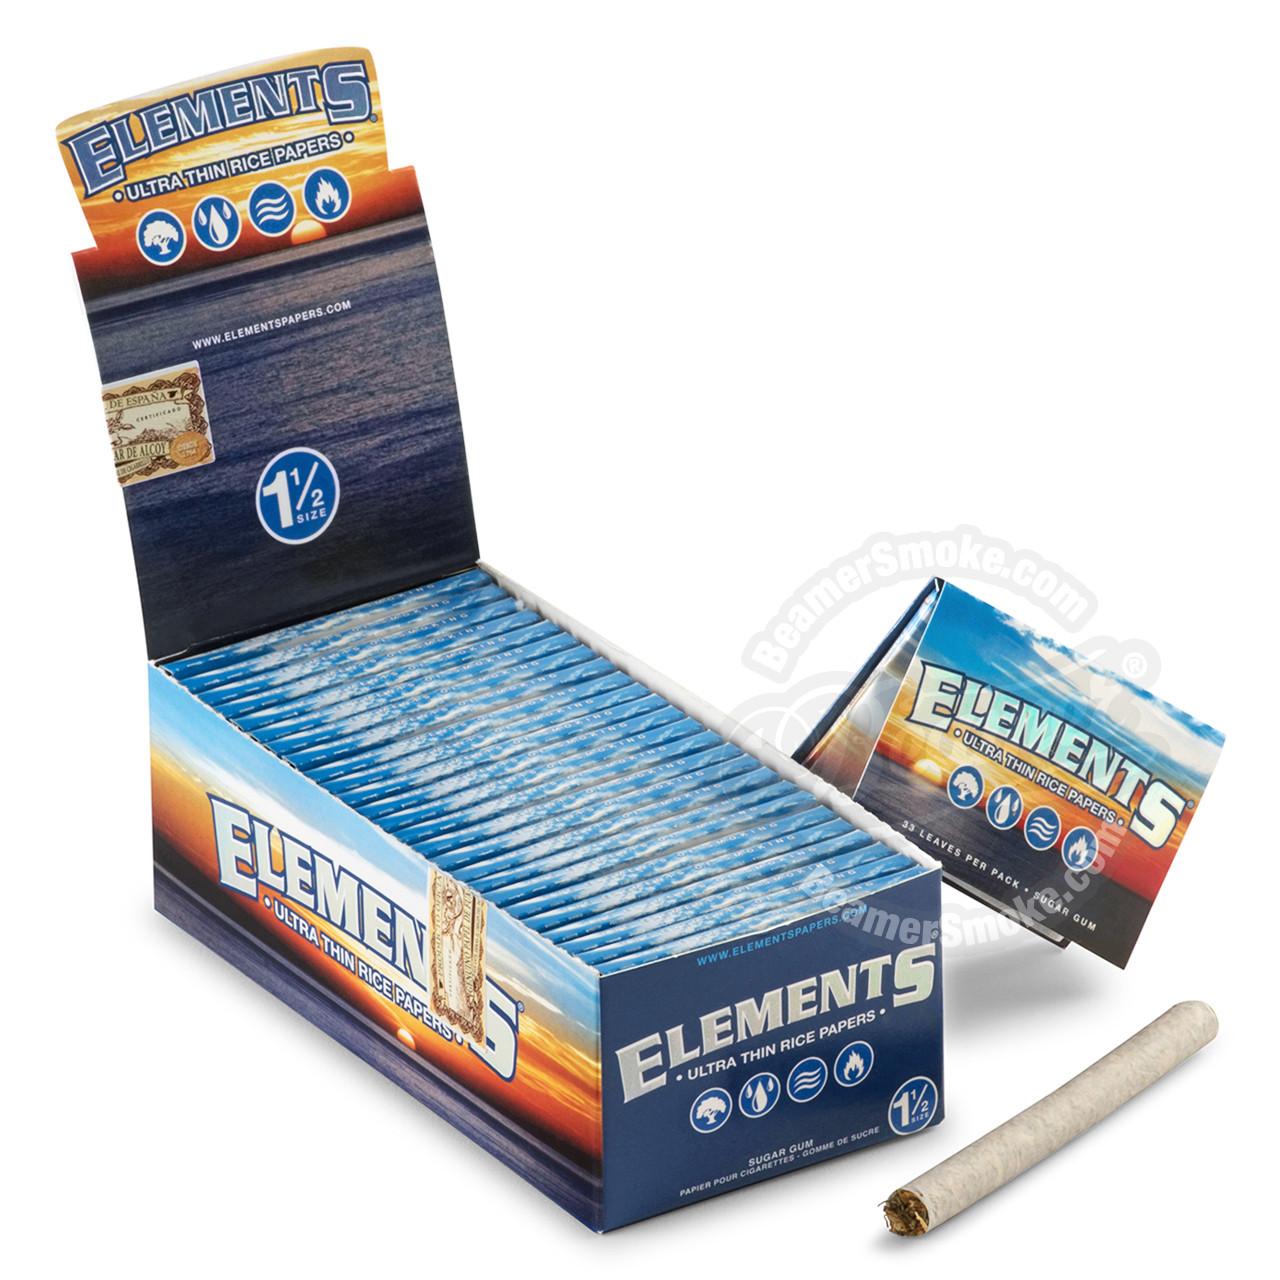 elements papers tips beamer smoke